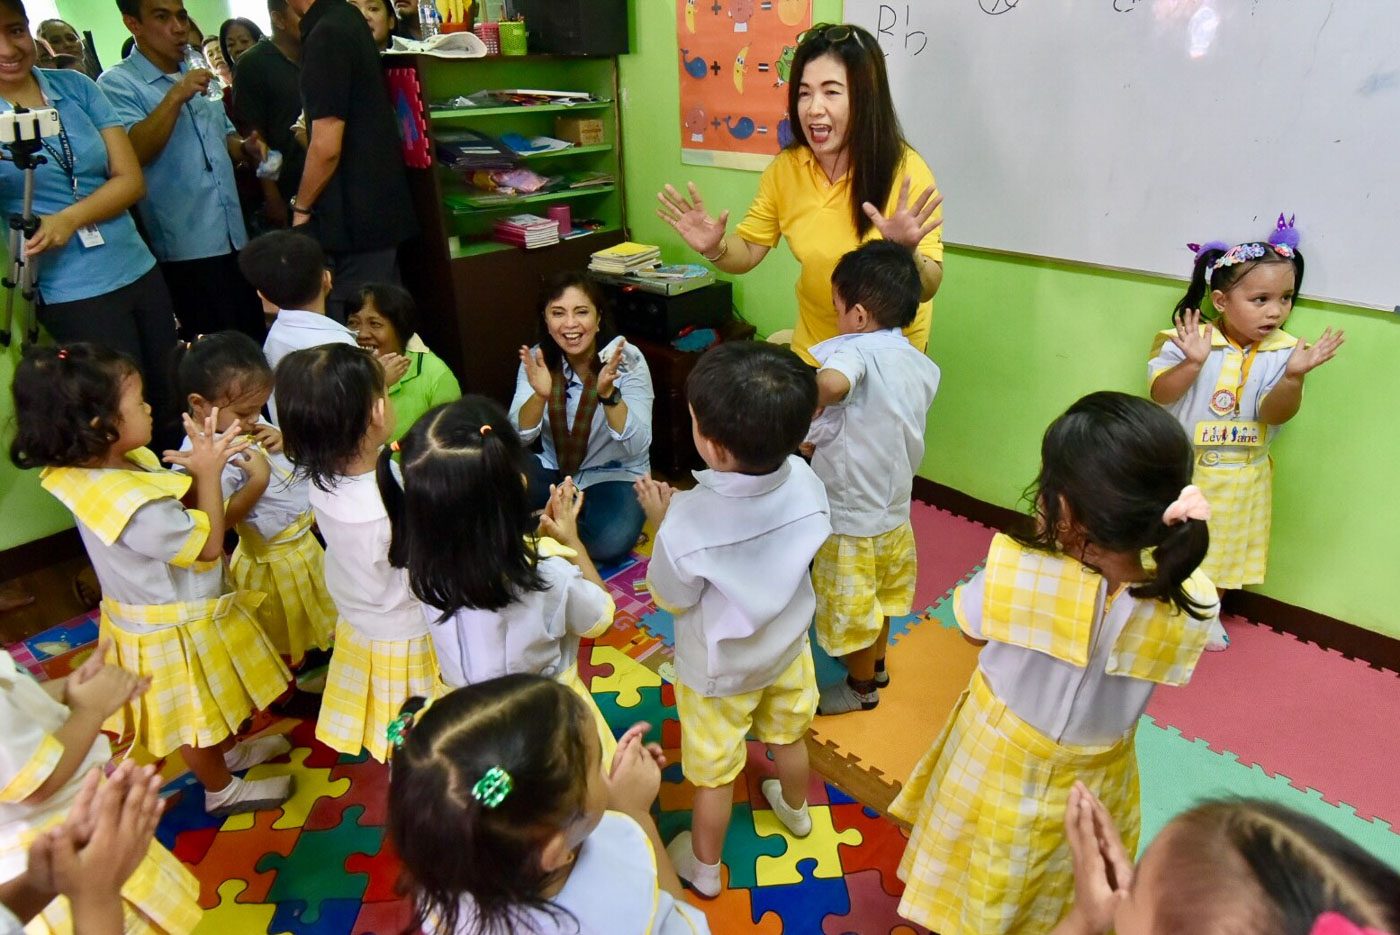 Robredo’s Angat Buhay benefits 83,707 families in 1st year